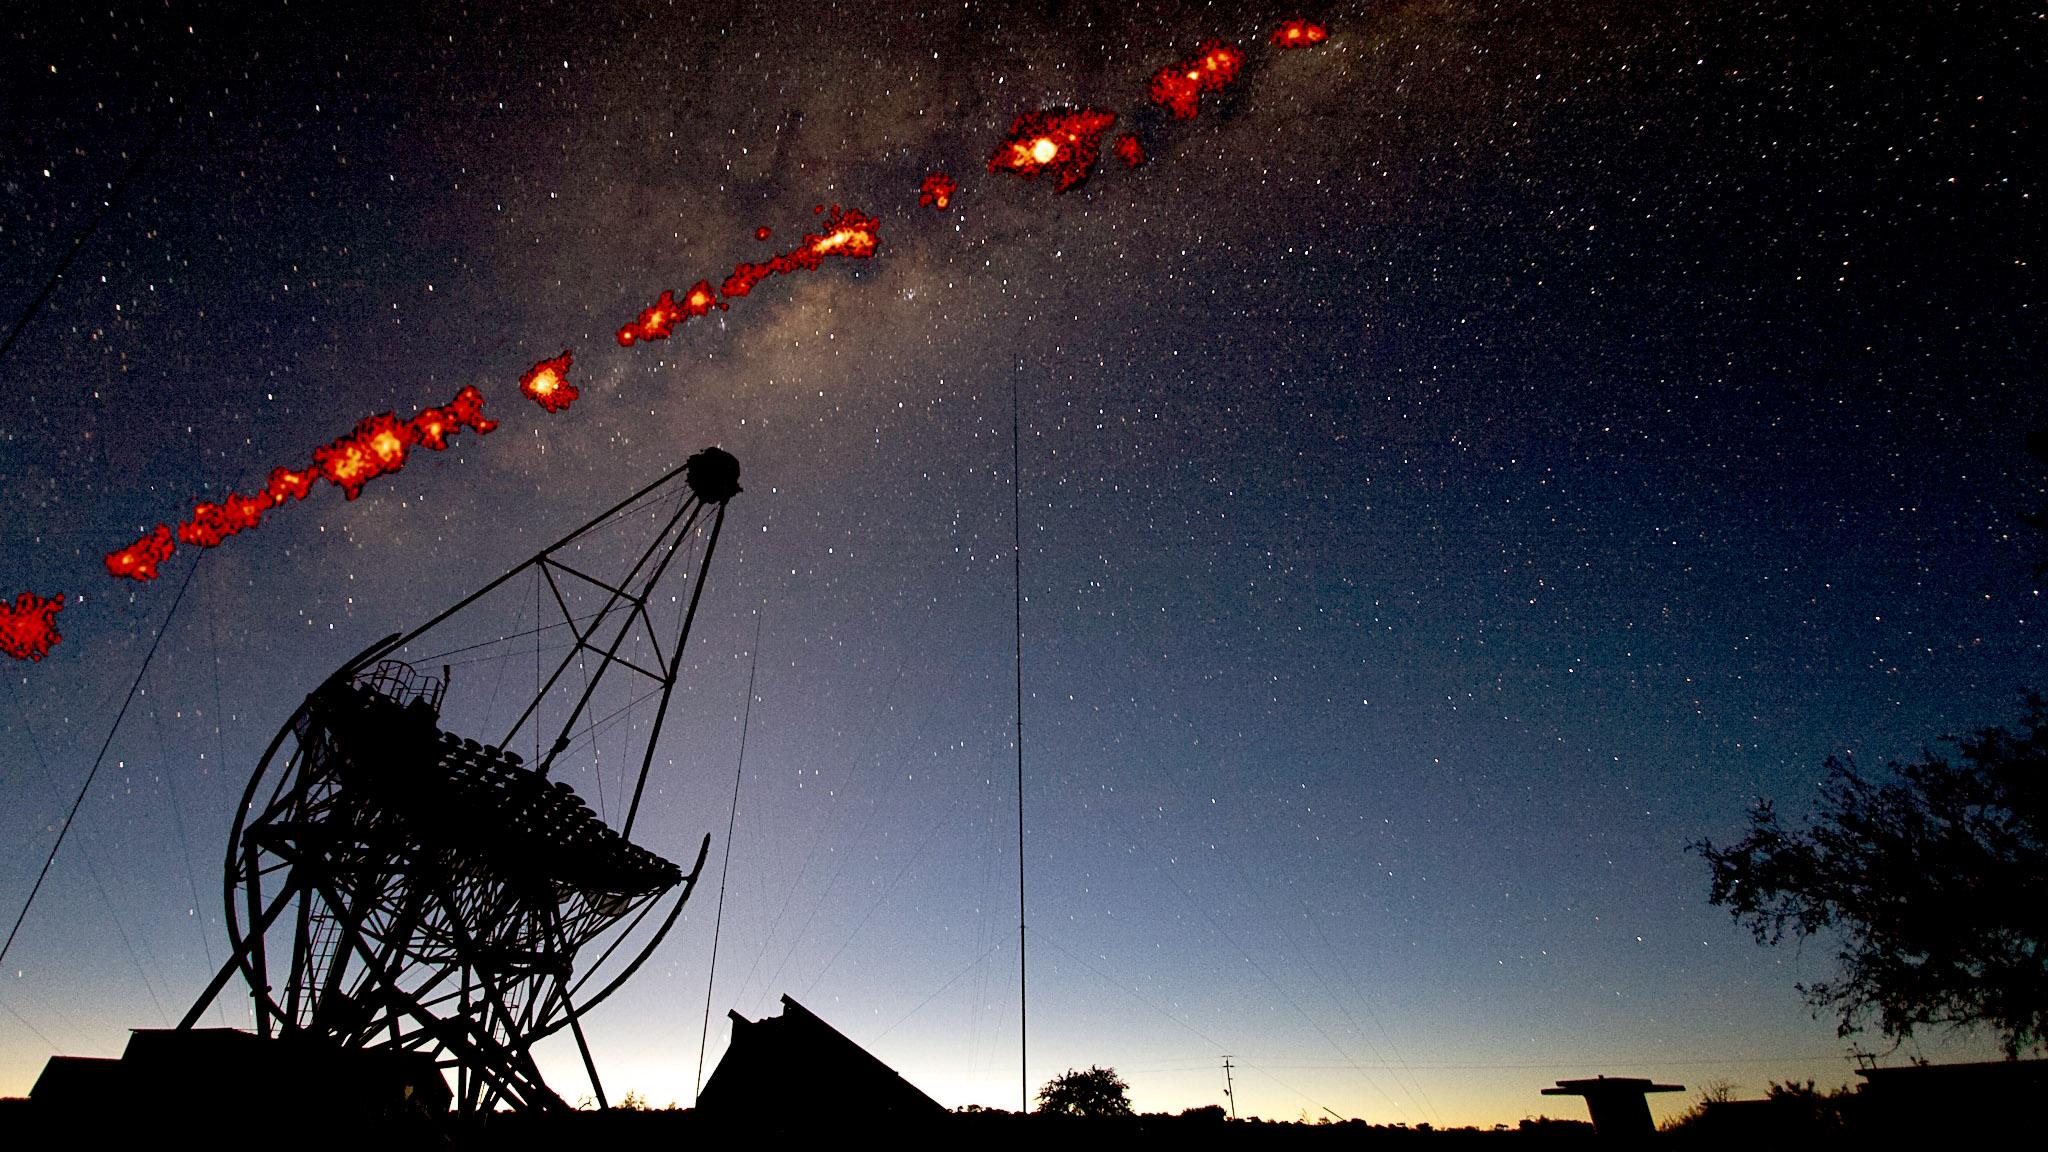 Gamma-rays as measured by the HESS array on the night sky over Namibia, with one of the small HESS telescopes in the foreground.